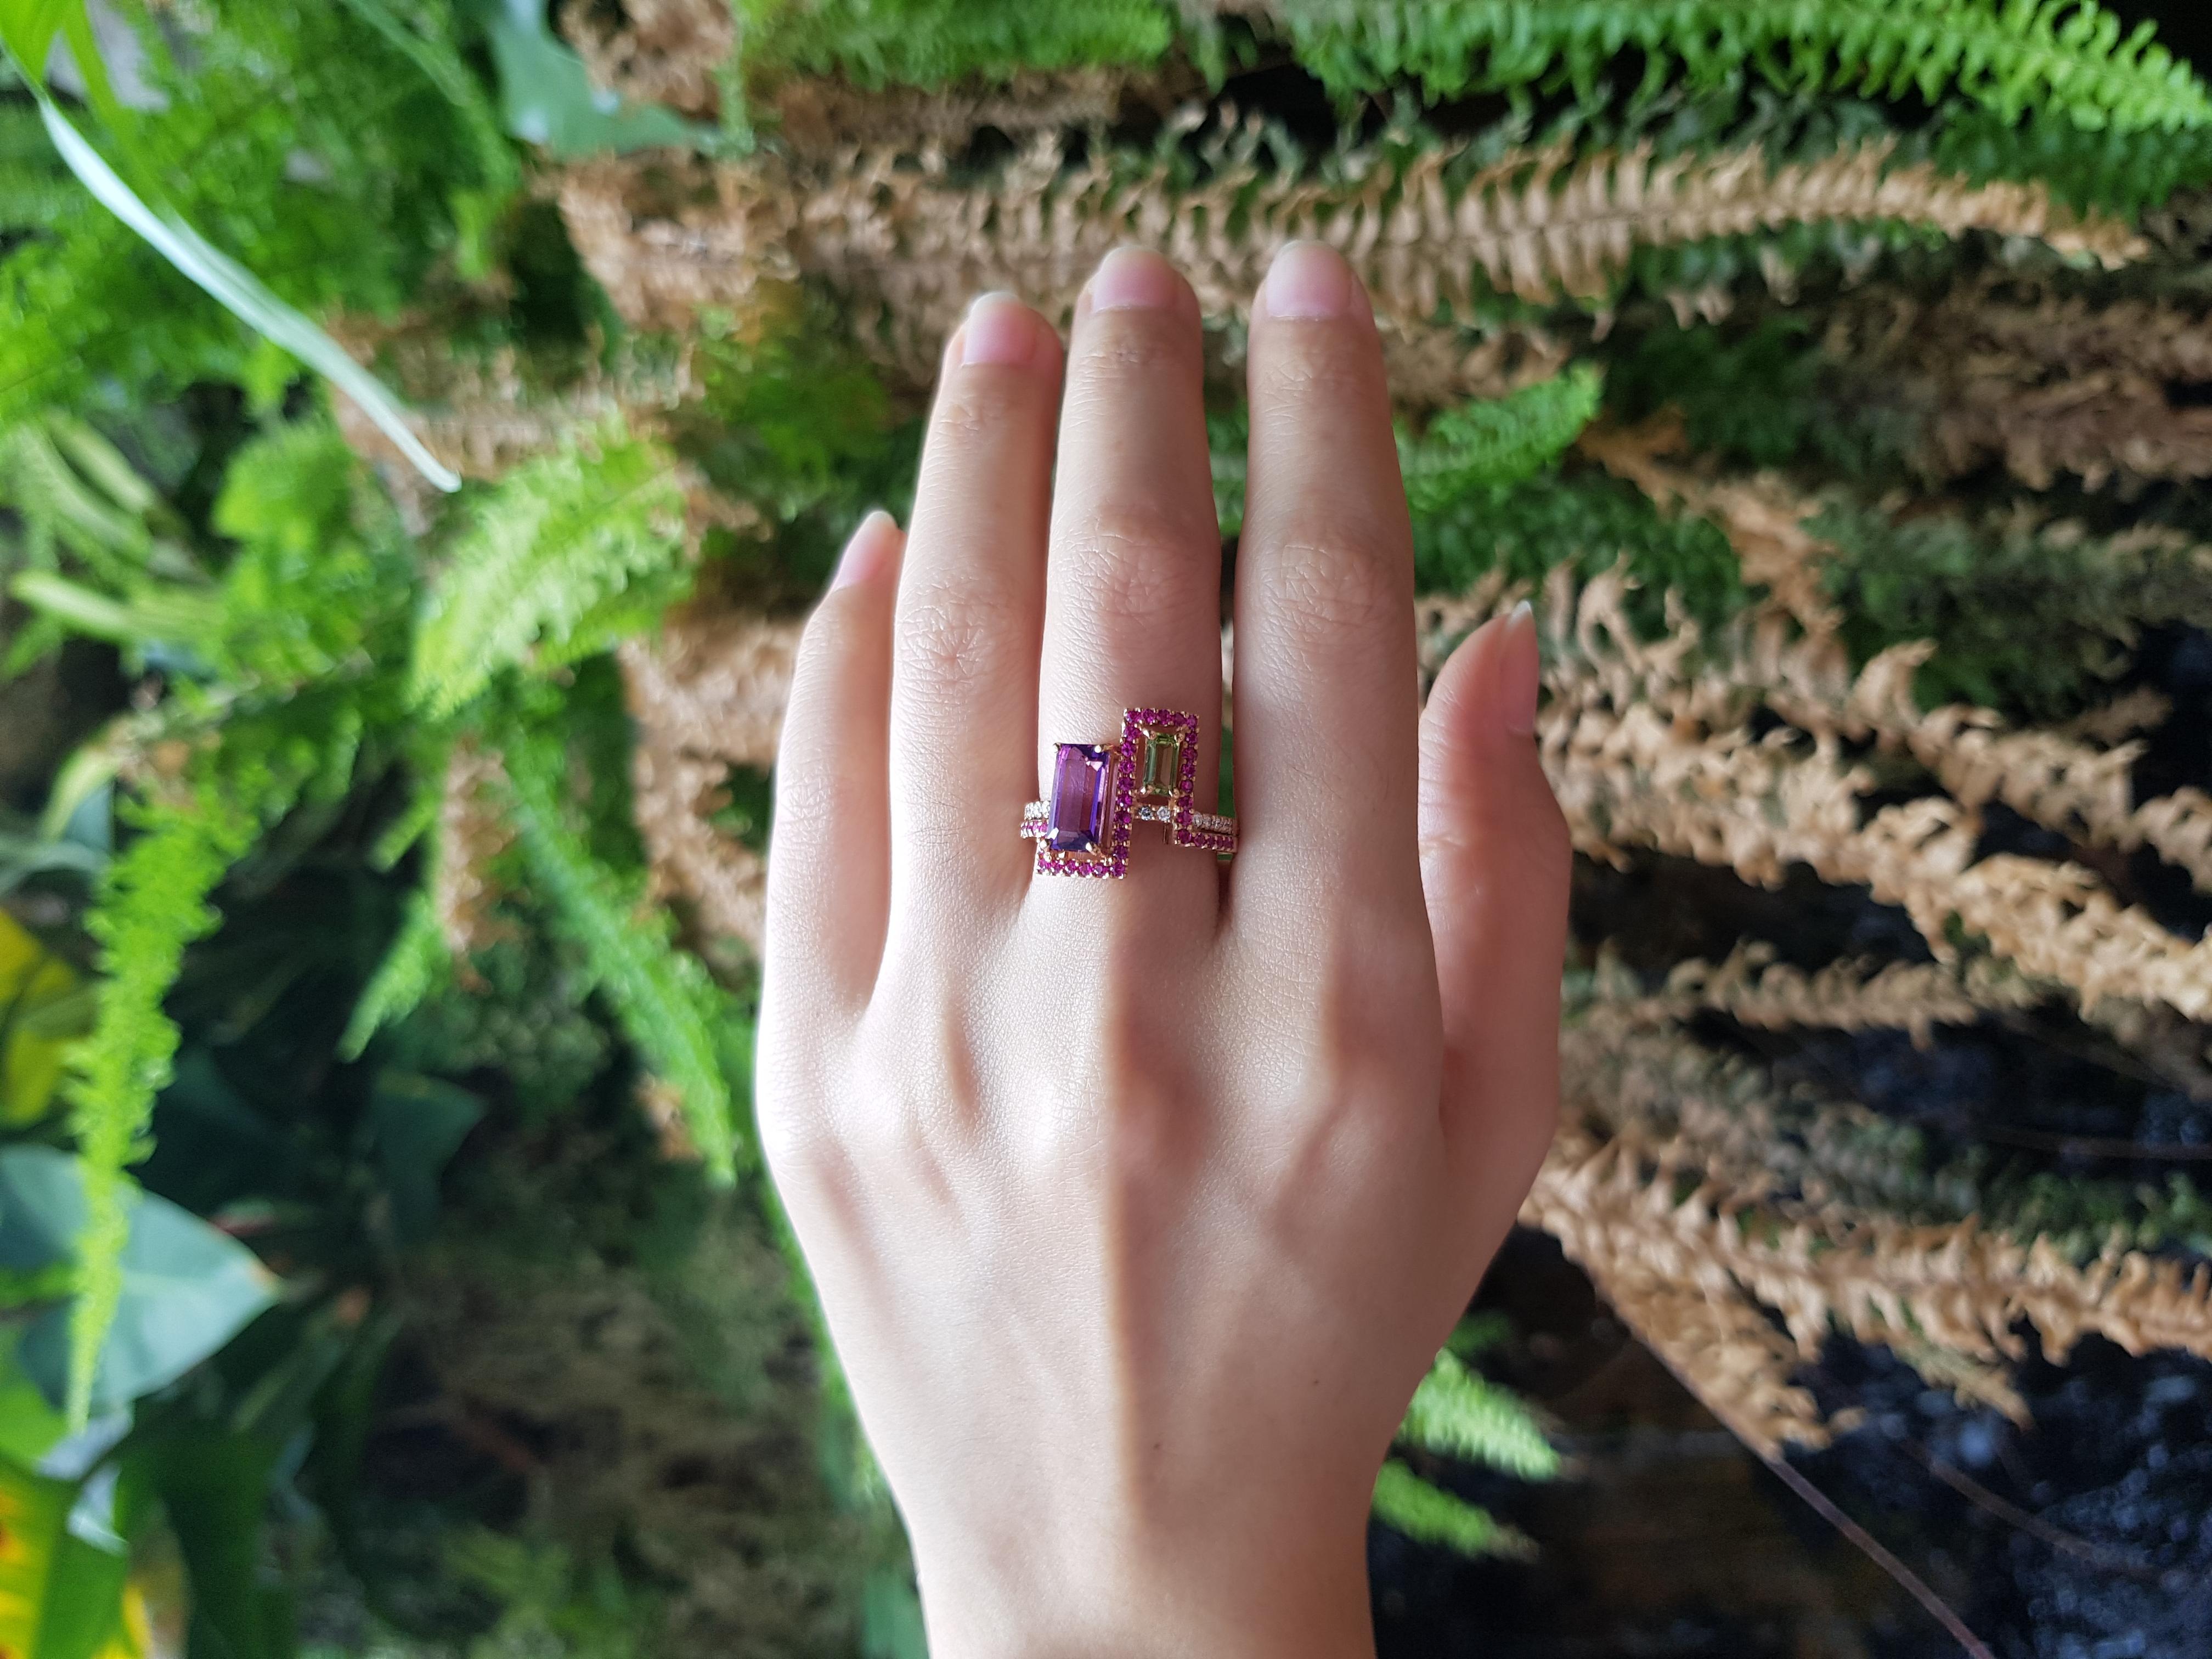 Amethyst 1.58 carats, Peridot 1.12 carats, Pink Sapphire 0.46 carat and Diamond 0.11 carat Ring set in 18 Karat Rose Gold Settings

Width:  1.5 cm 
Length:  1.6 cm
Ring Size: 54
Total Weight: 6.42 grams

Uncompromisingly modern and exuding, the